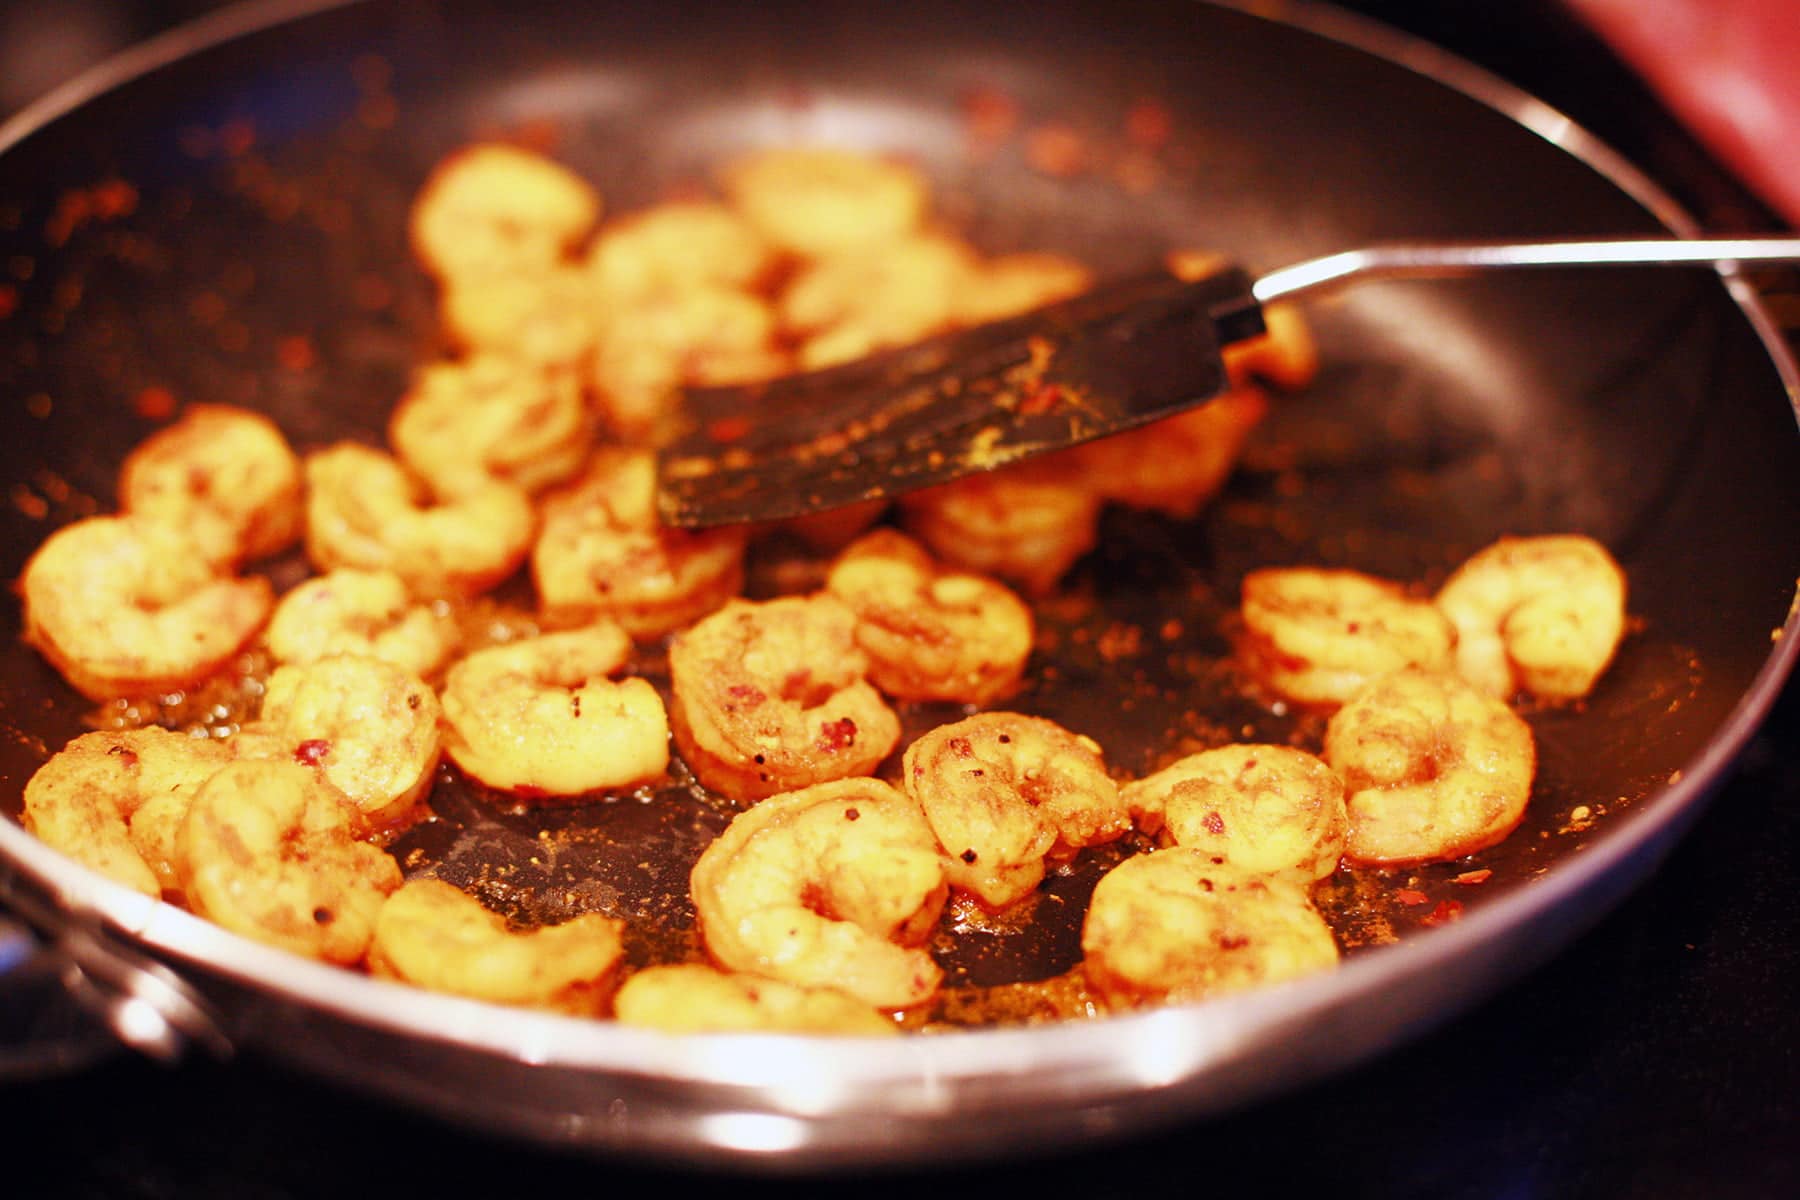 A close up view of curried shrimps being sauteed in a pan.